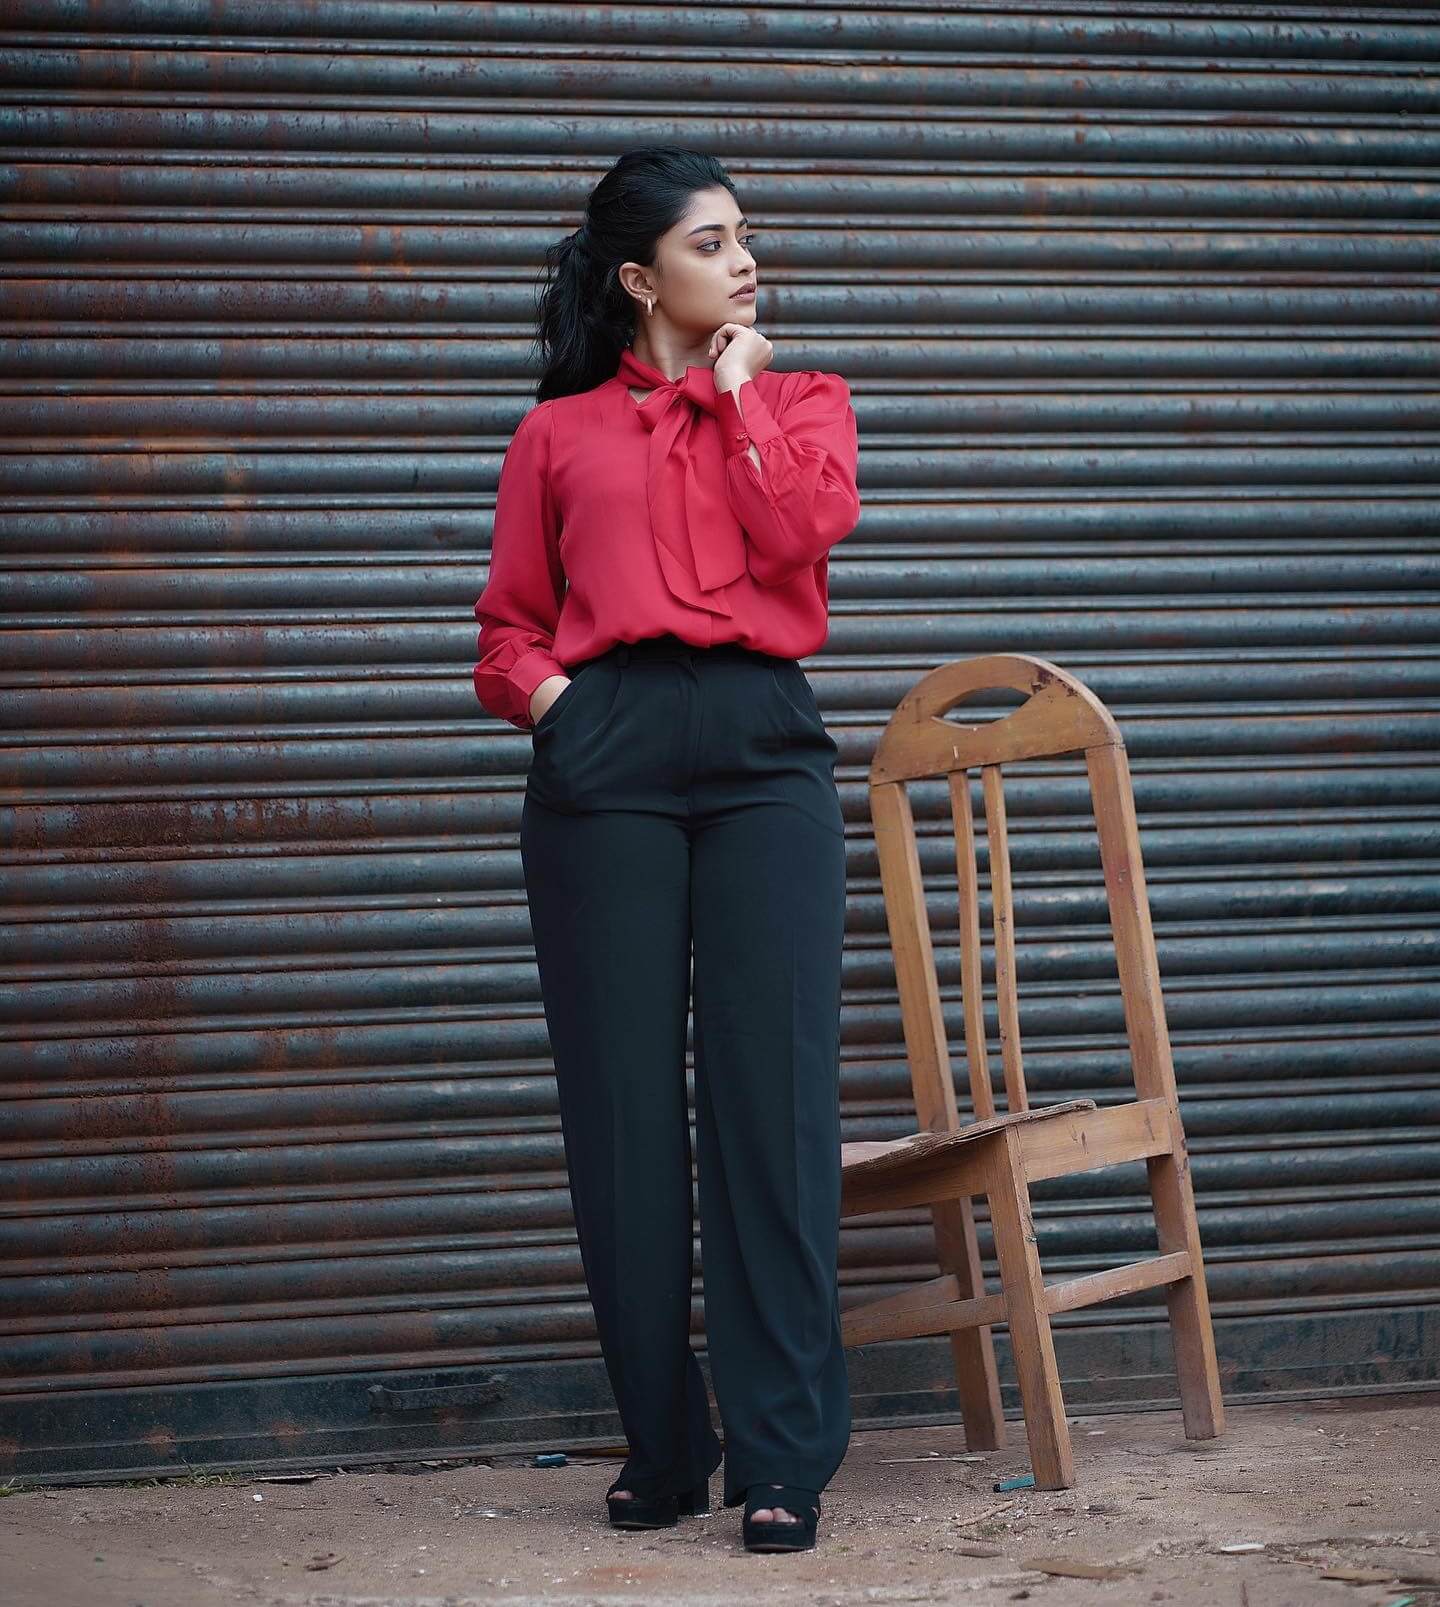 Ammu Abhirami Slaying In A Formal Classy Red Shirt Paired With Chic Black Pants Radiant Looks & Outfits